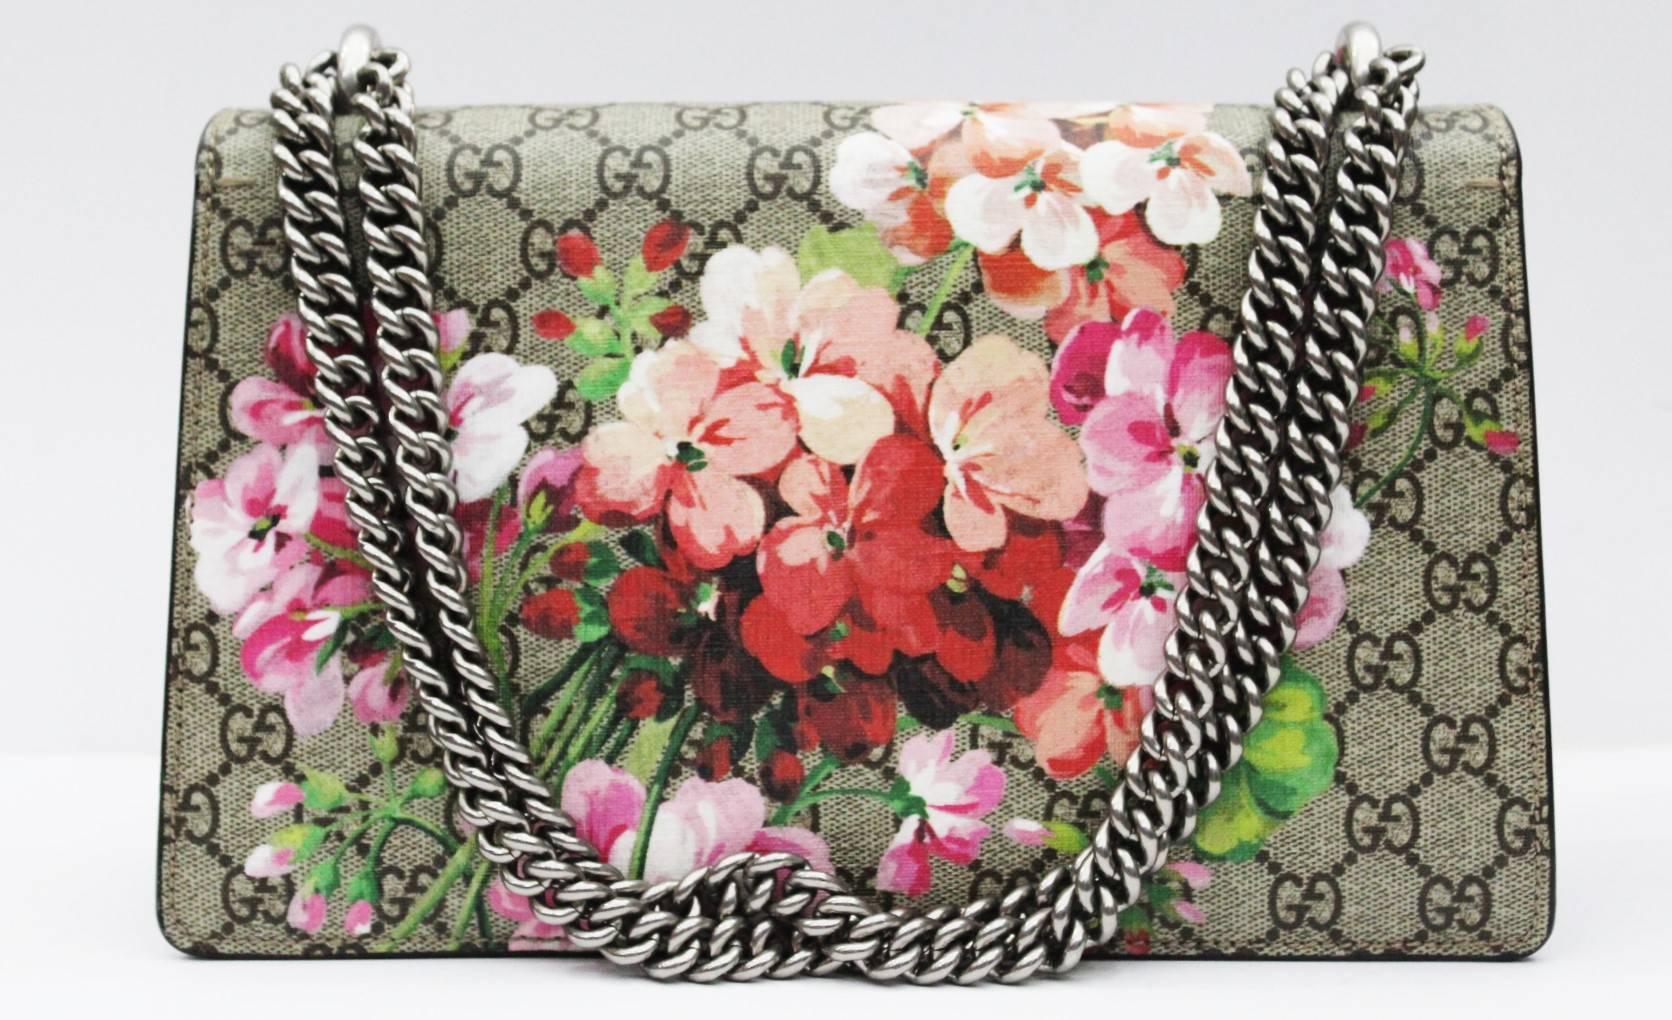 Beautiful Bag Gucci, the model is Dionysus and the size is the small. GG Supreme fabric, material with reduced environmental impact, with Blooms print and antique pink suede detail. Antique silver-colored finishes. Closing with pin and lateral